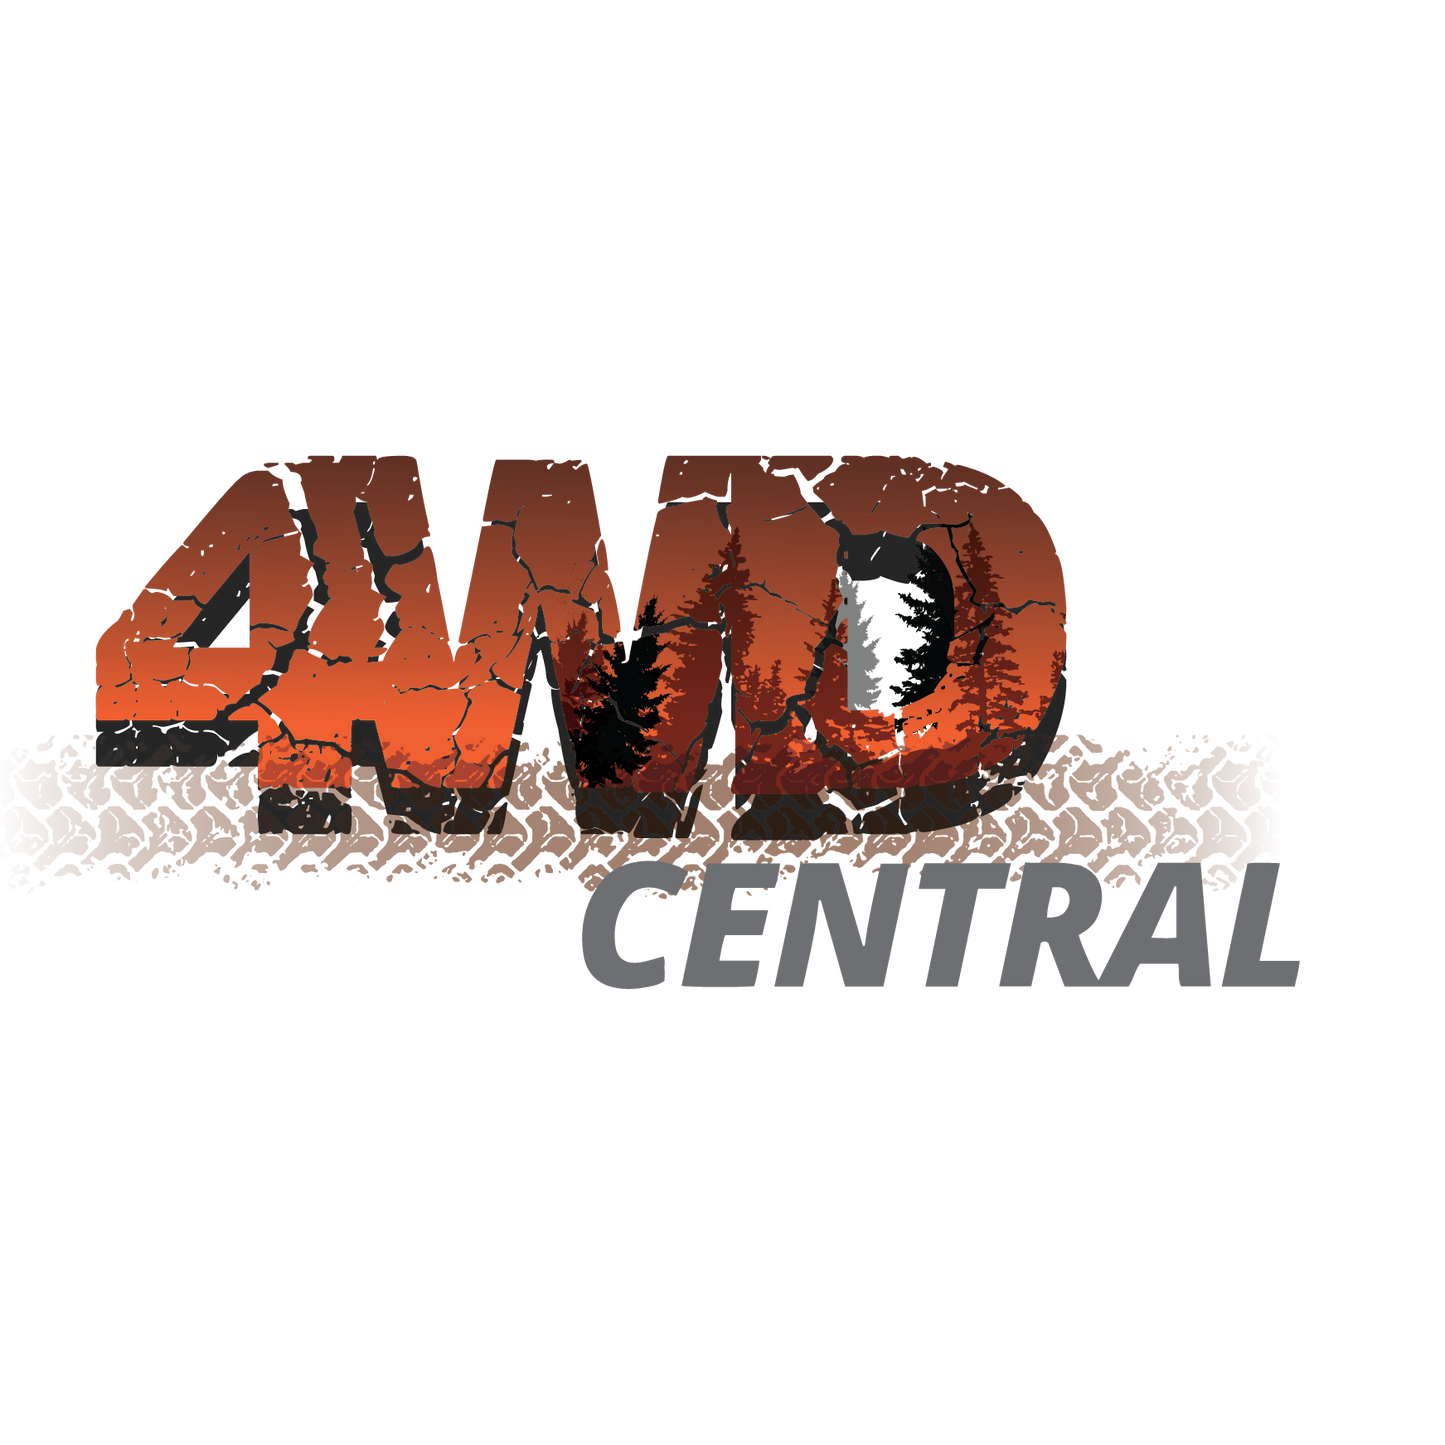 4WD Central - 4WD Central Gift Card -